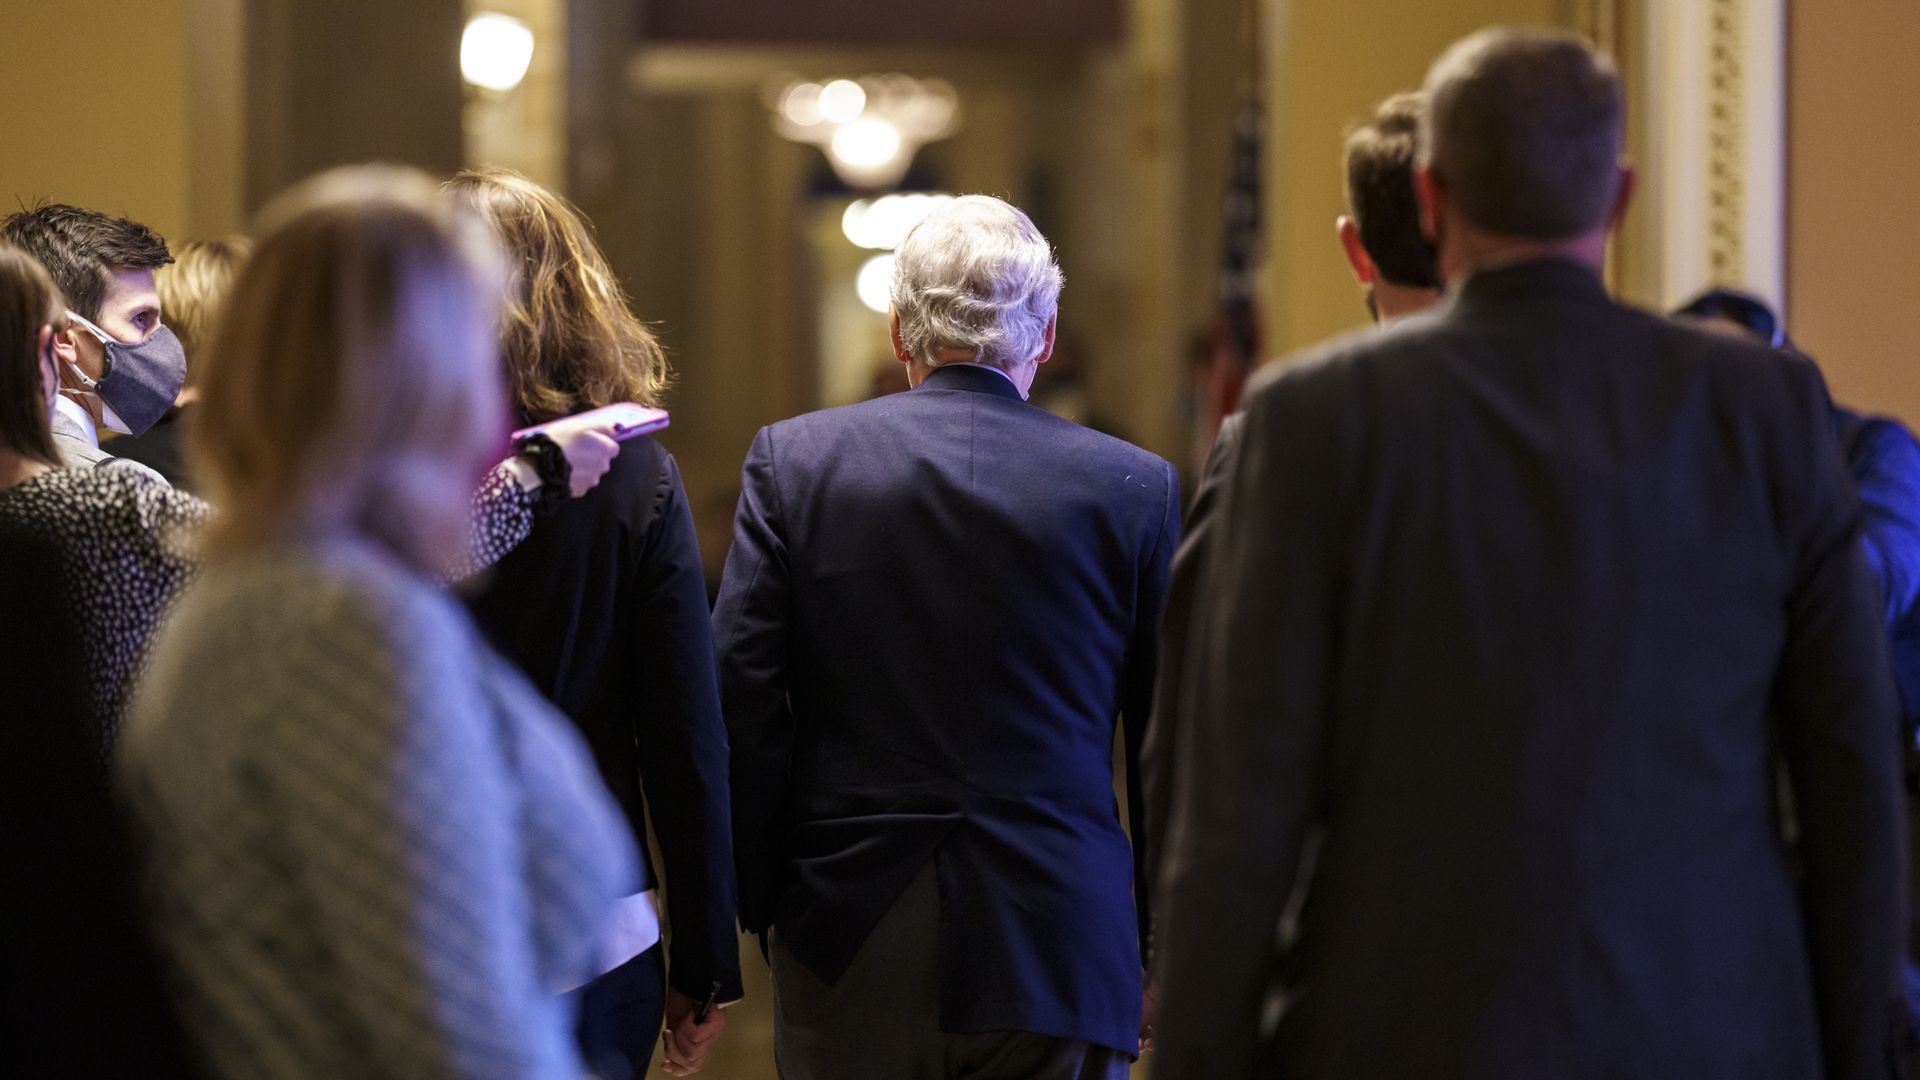 Senate Minority Leader Mitch McConnell is seen walking away from the Senate Chamber.